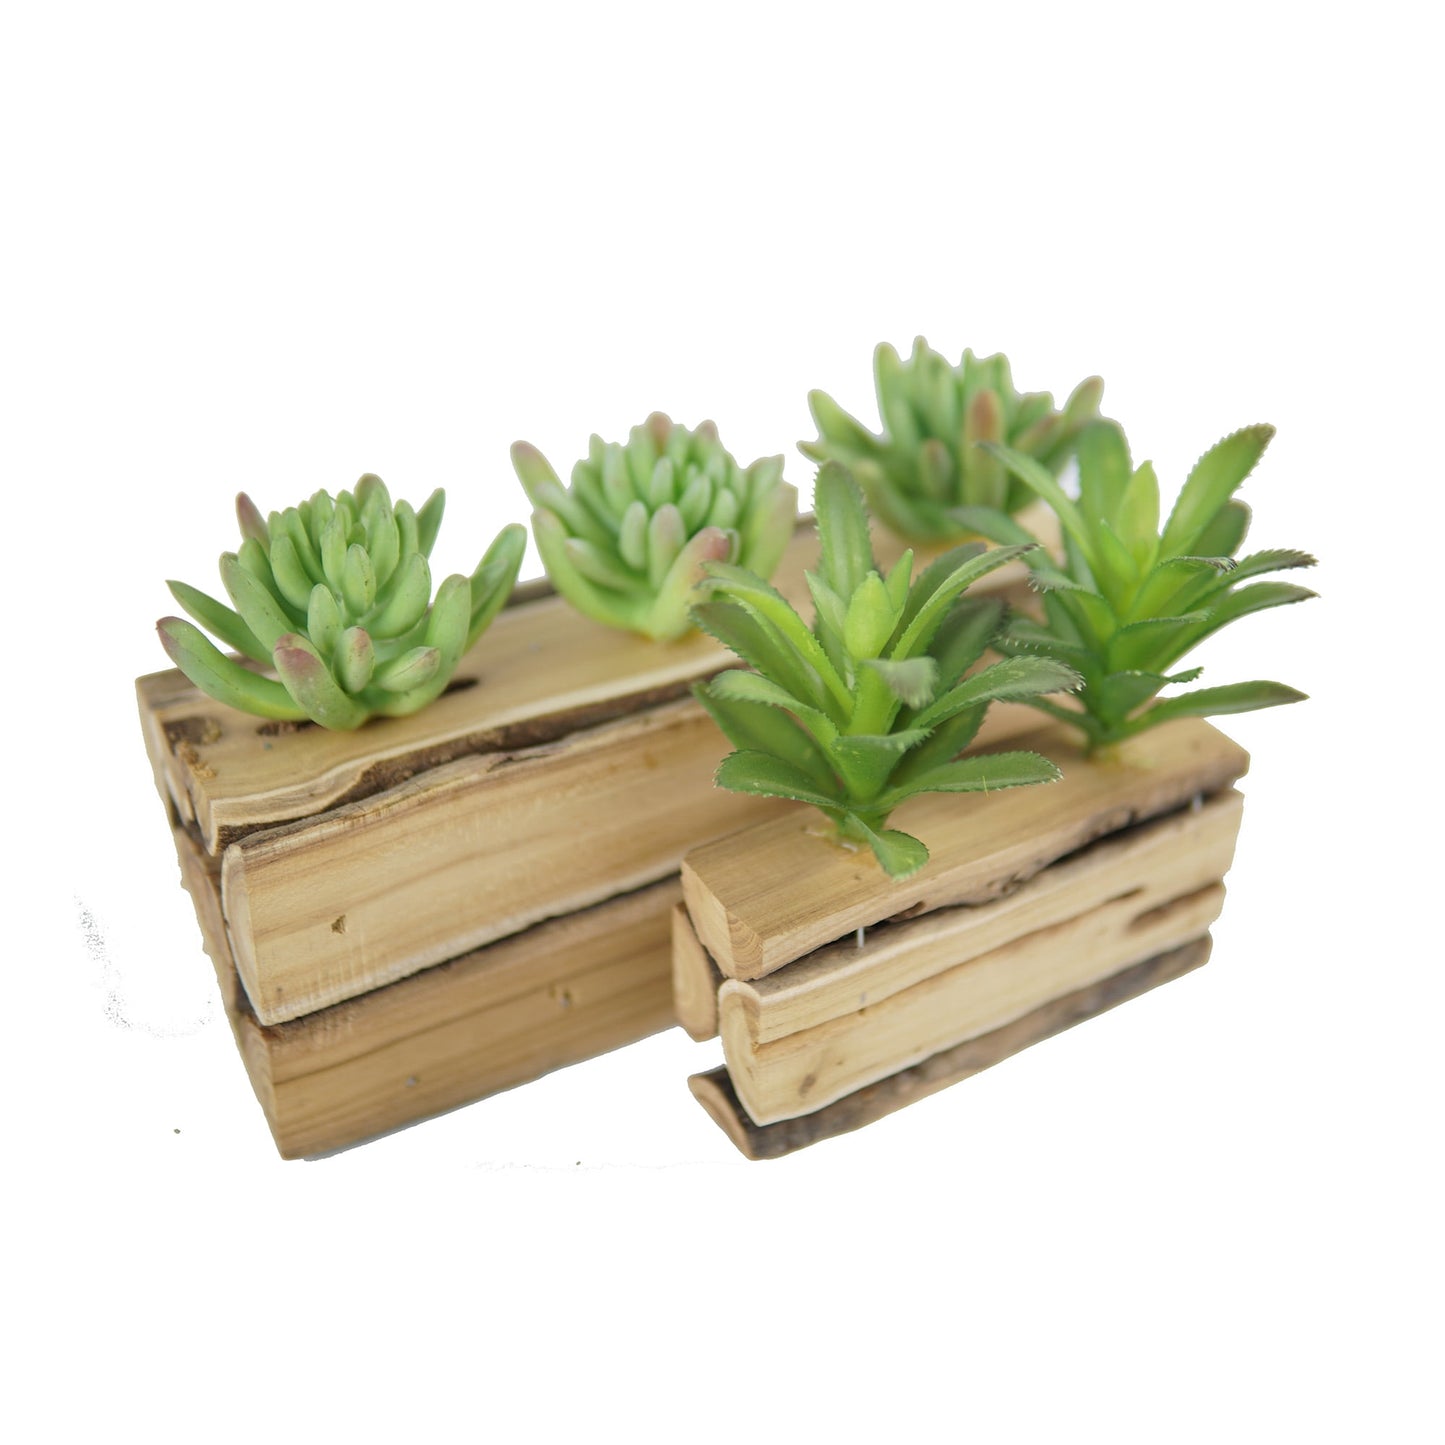 Direct Wicker Artificial Plants, Mini Fake Plant Flowers In Pot 2 Pack Set Plastic Plant Small Real Plant Weatherproof Green Bonsai Outdoor & Indoor for Home Bathroom Balcony Office Garden Desk Decor